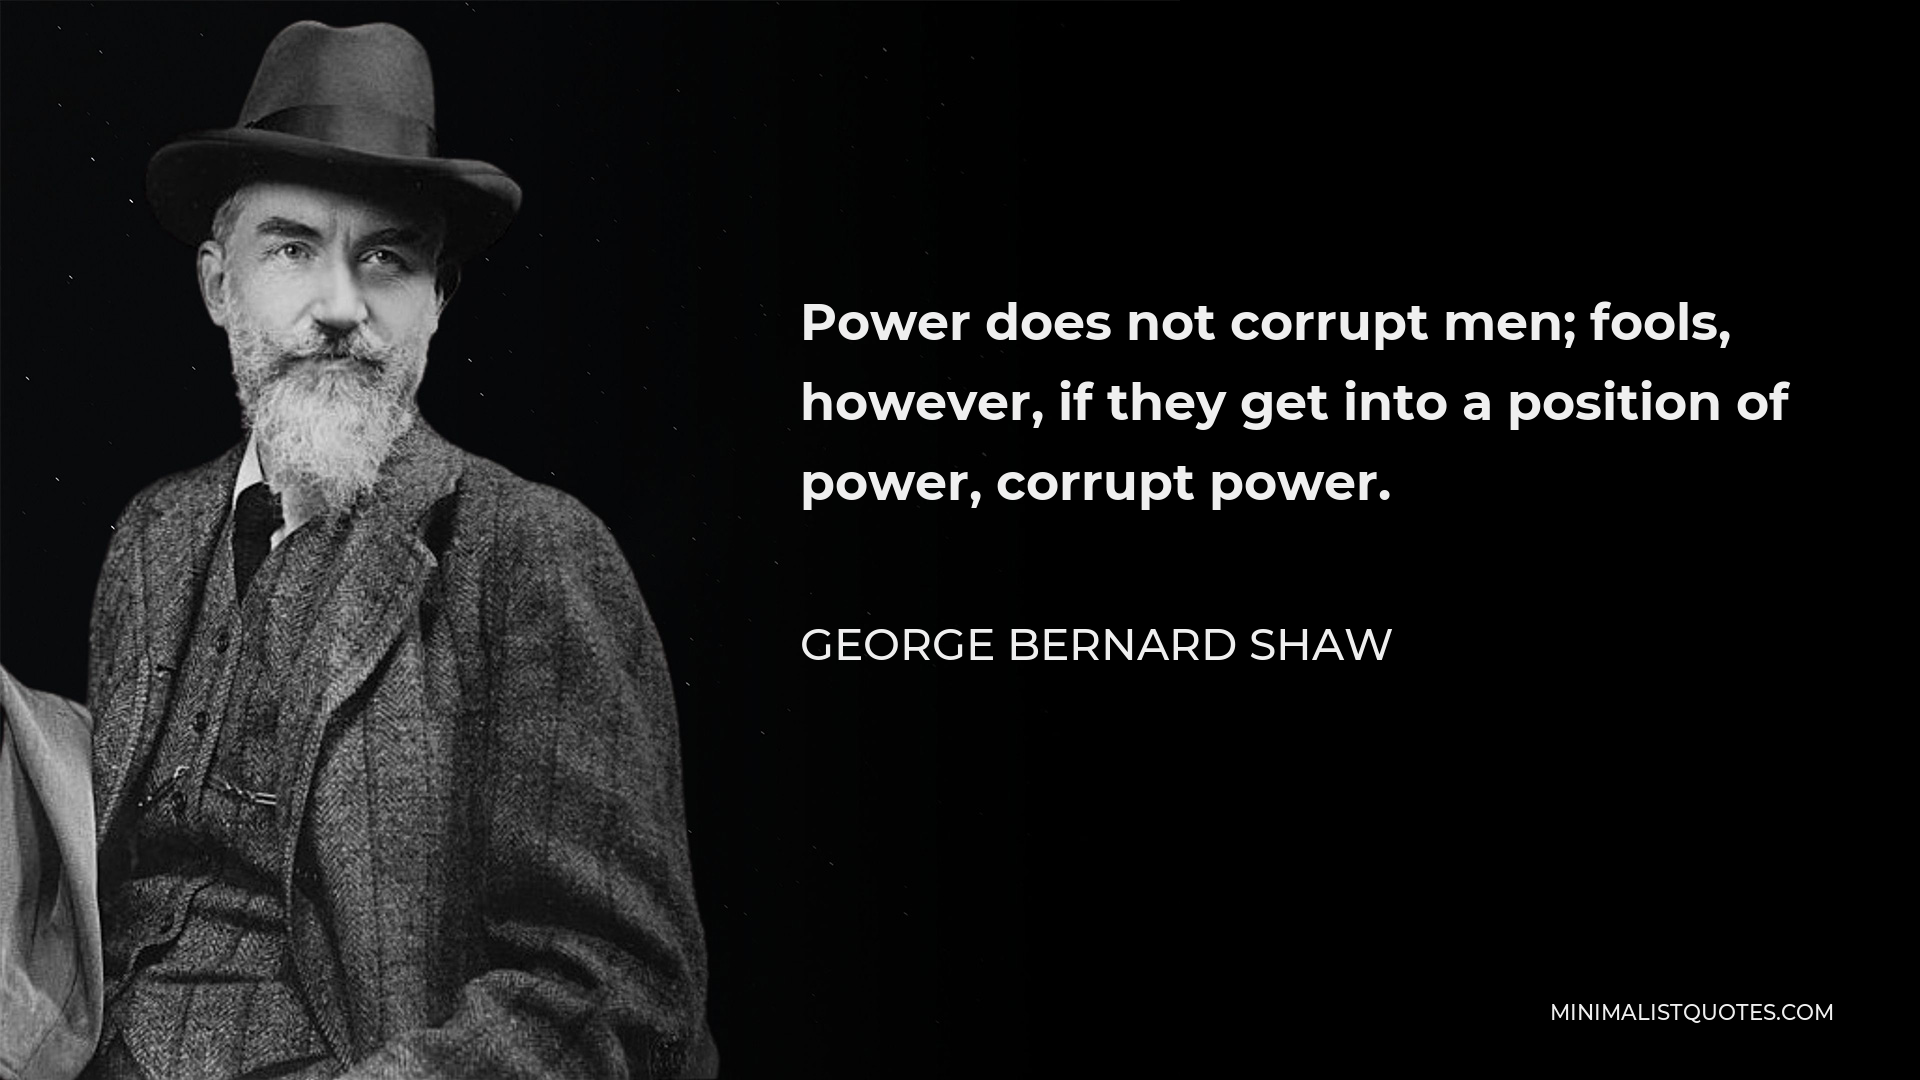 George Bernard Shaw Quote - Power does not corrupt men; fools, however, if they get into a position of power, corrupt power.